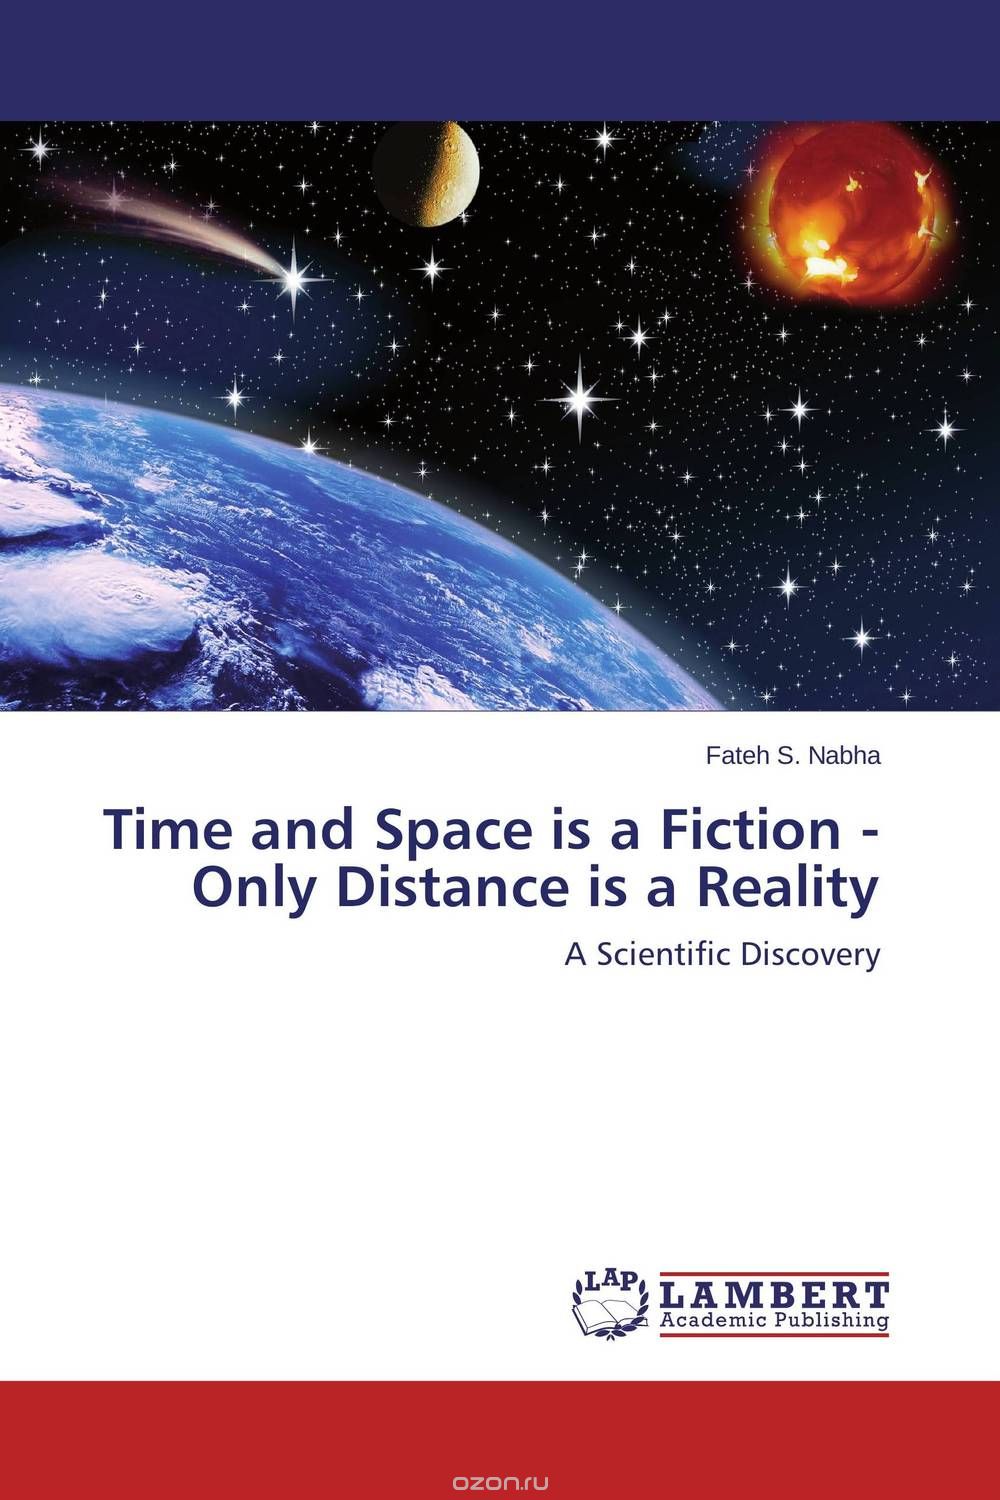 Time and Space is a Fiction - Only Distance is a Reality